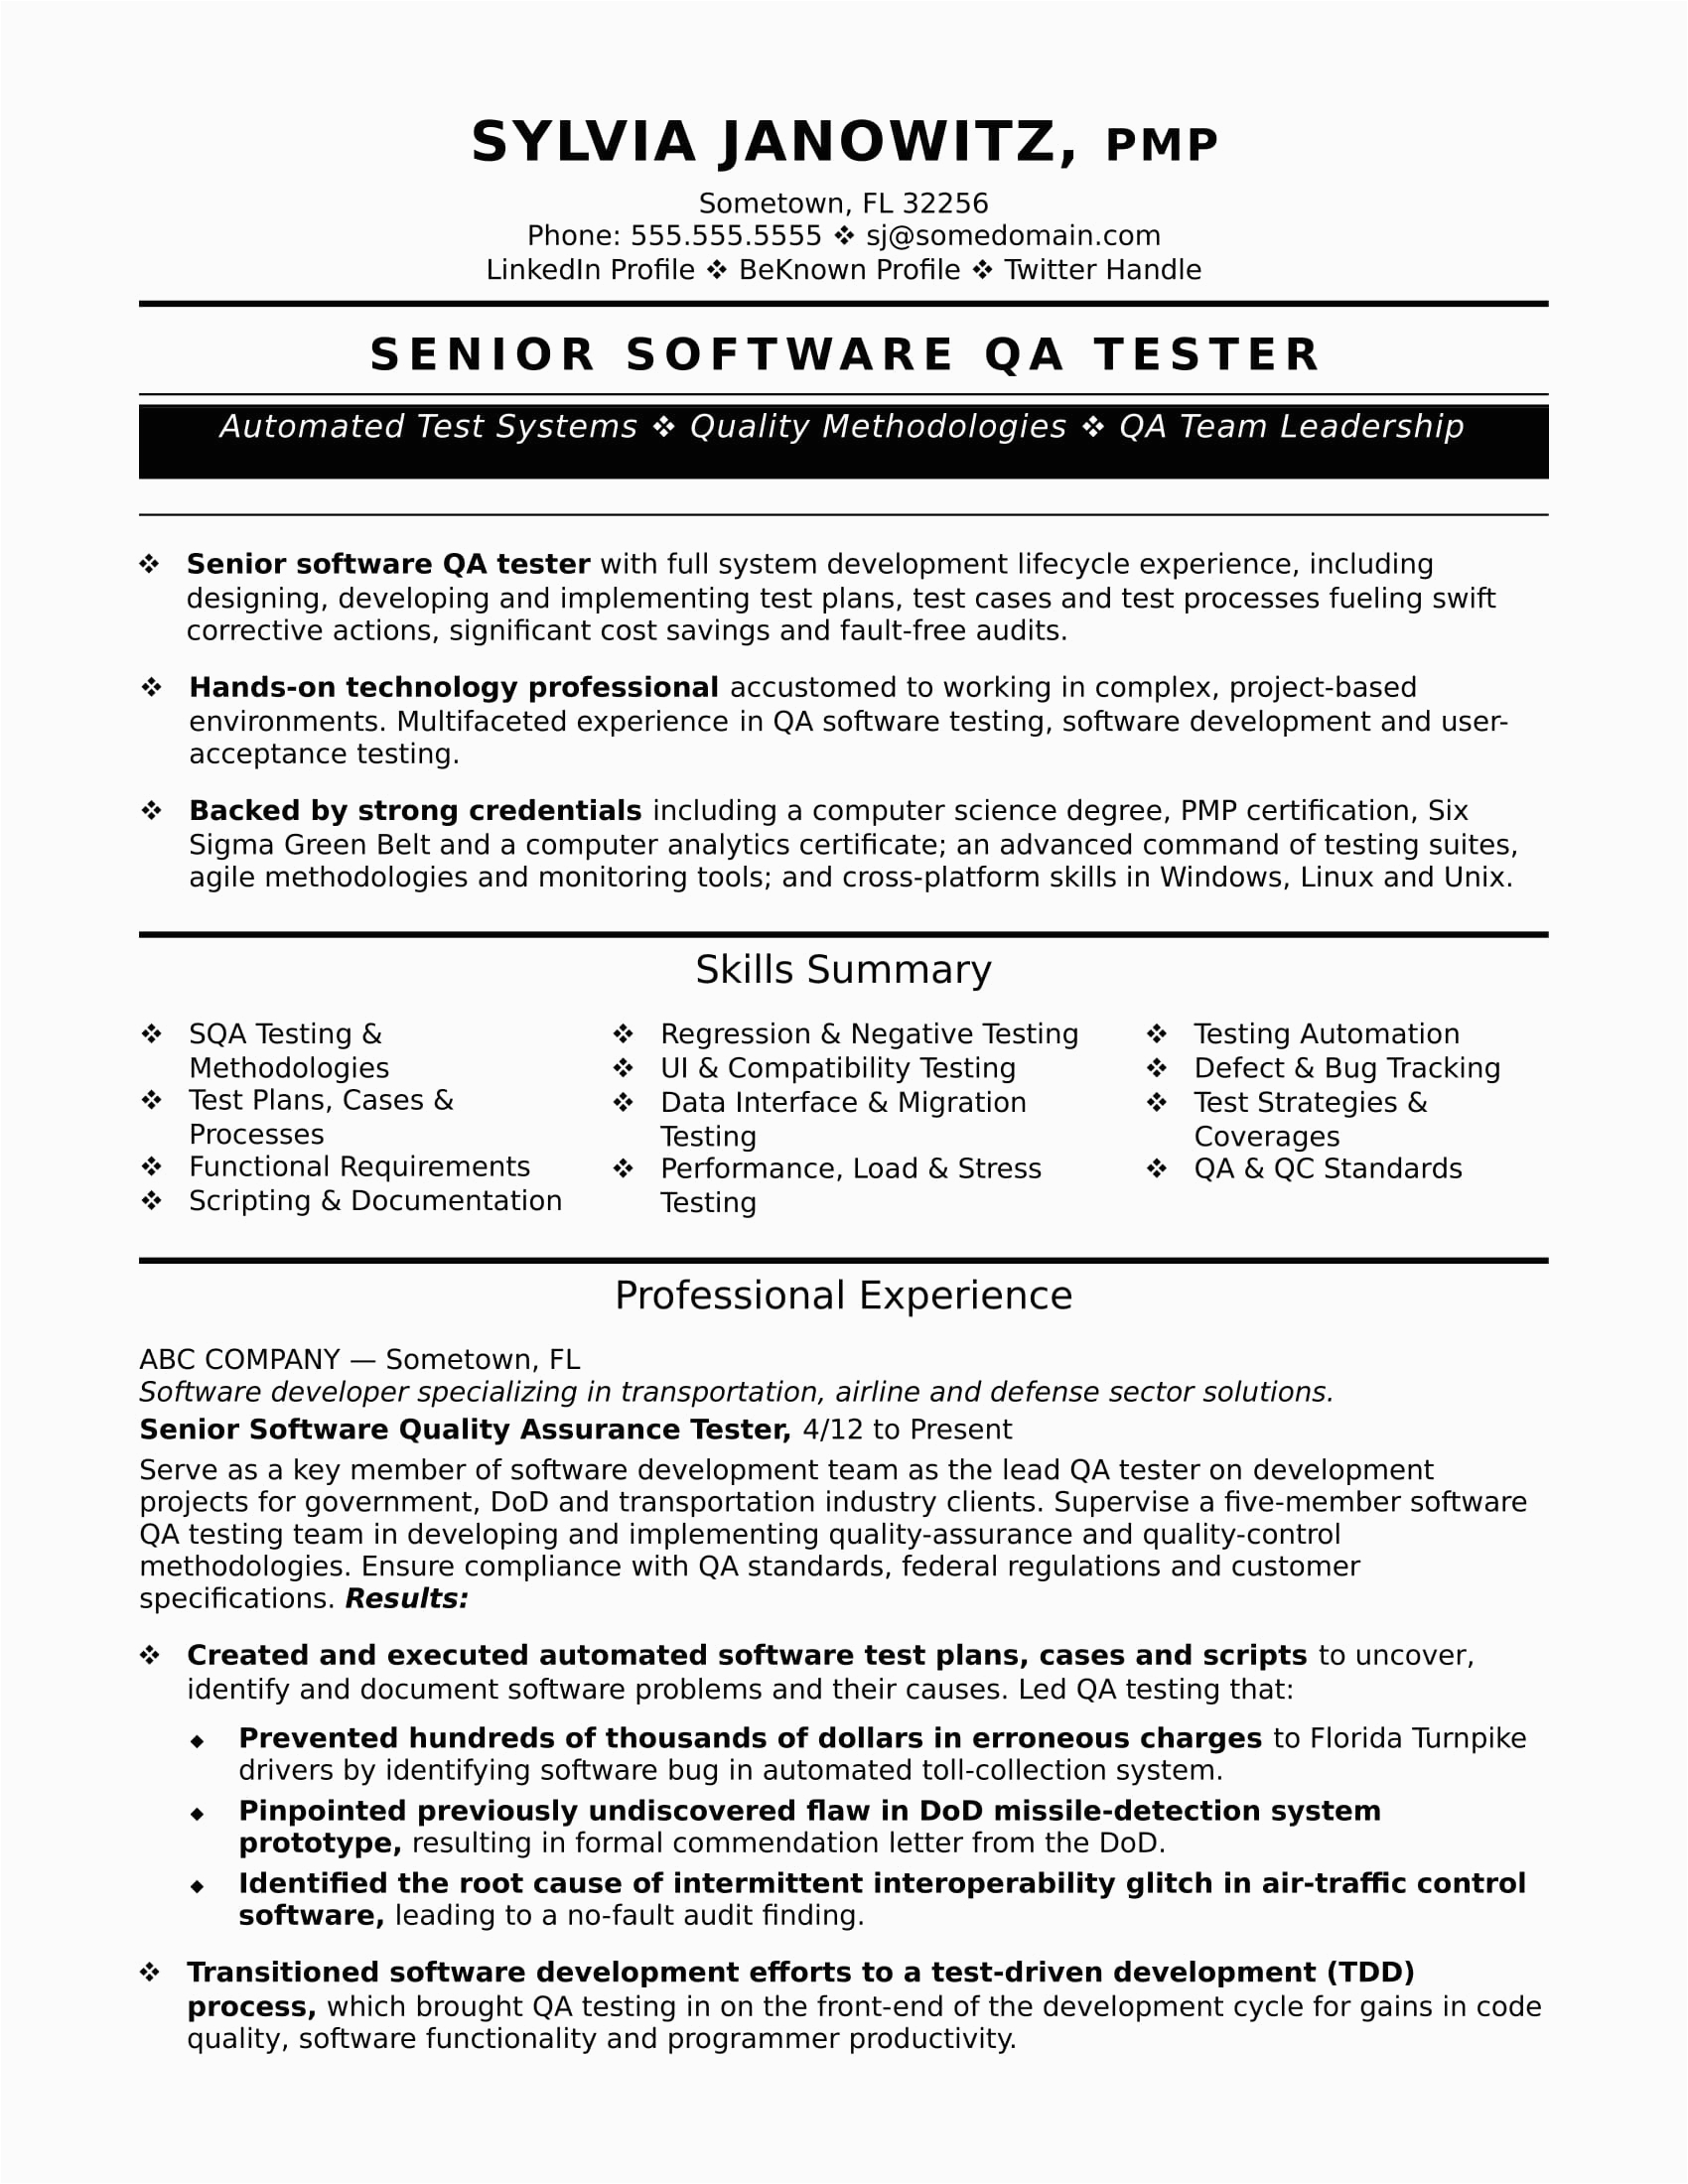 Sample Qa Automation Tester Resume In Jobsites Experienced Qa software Tester Resume Sample